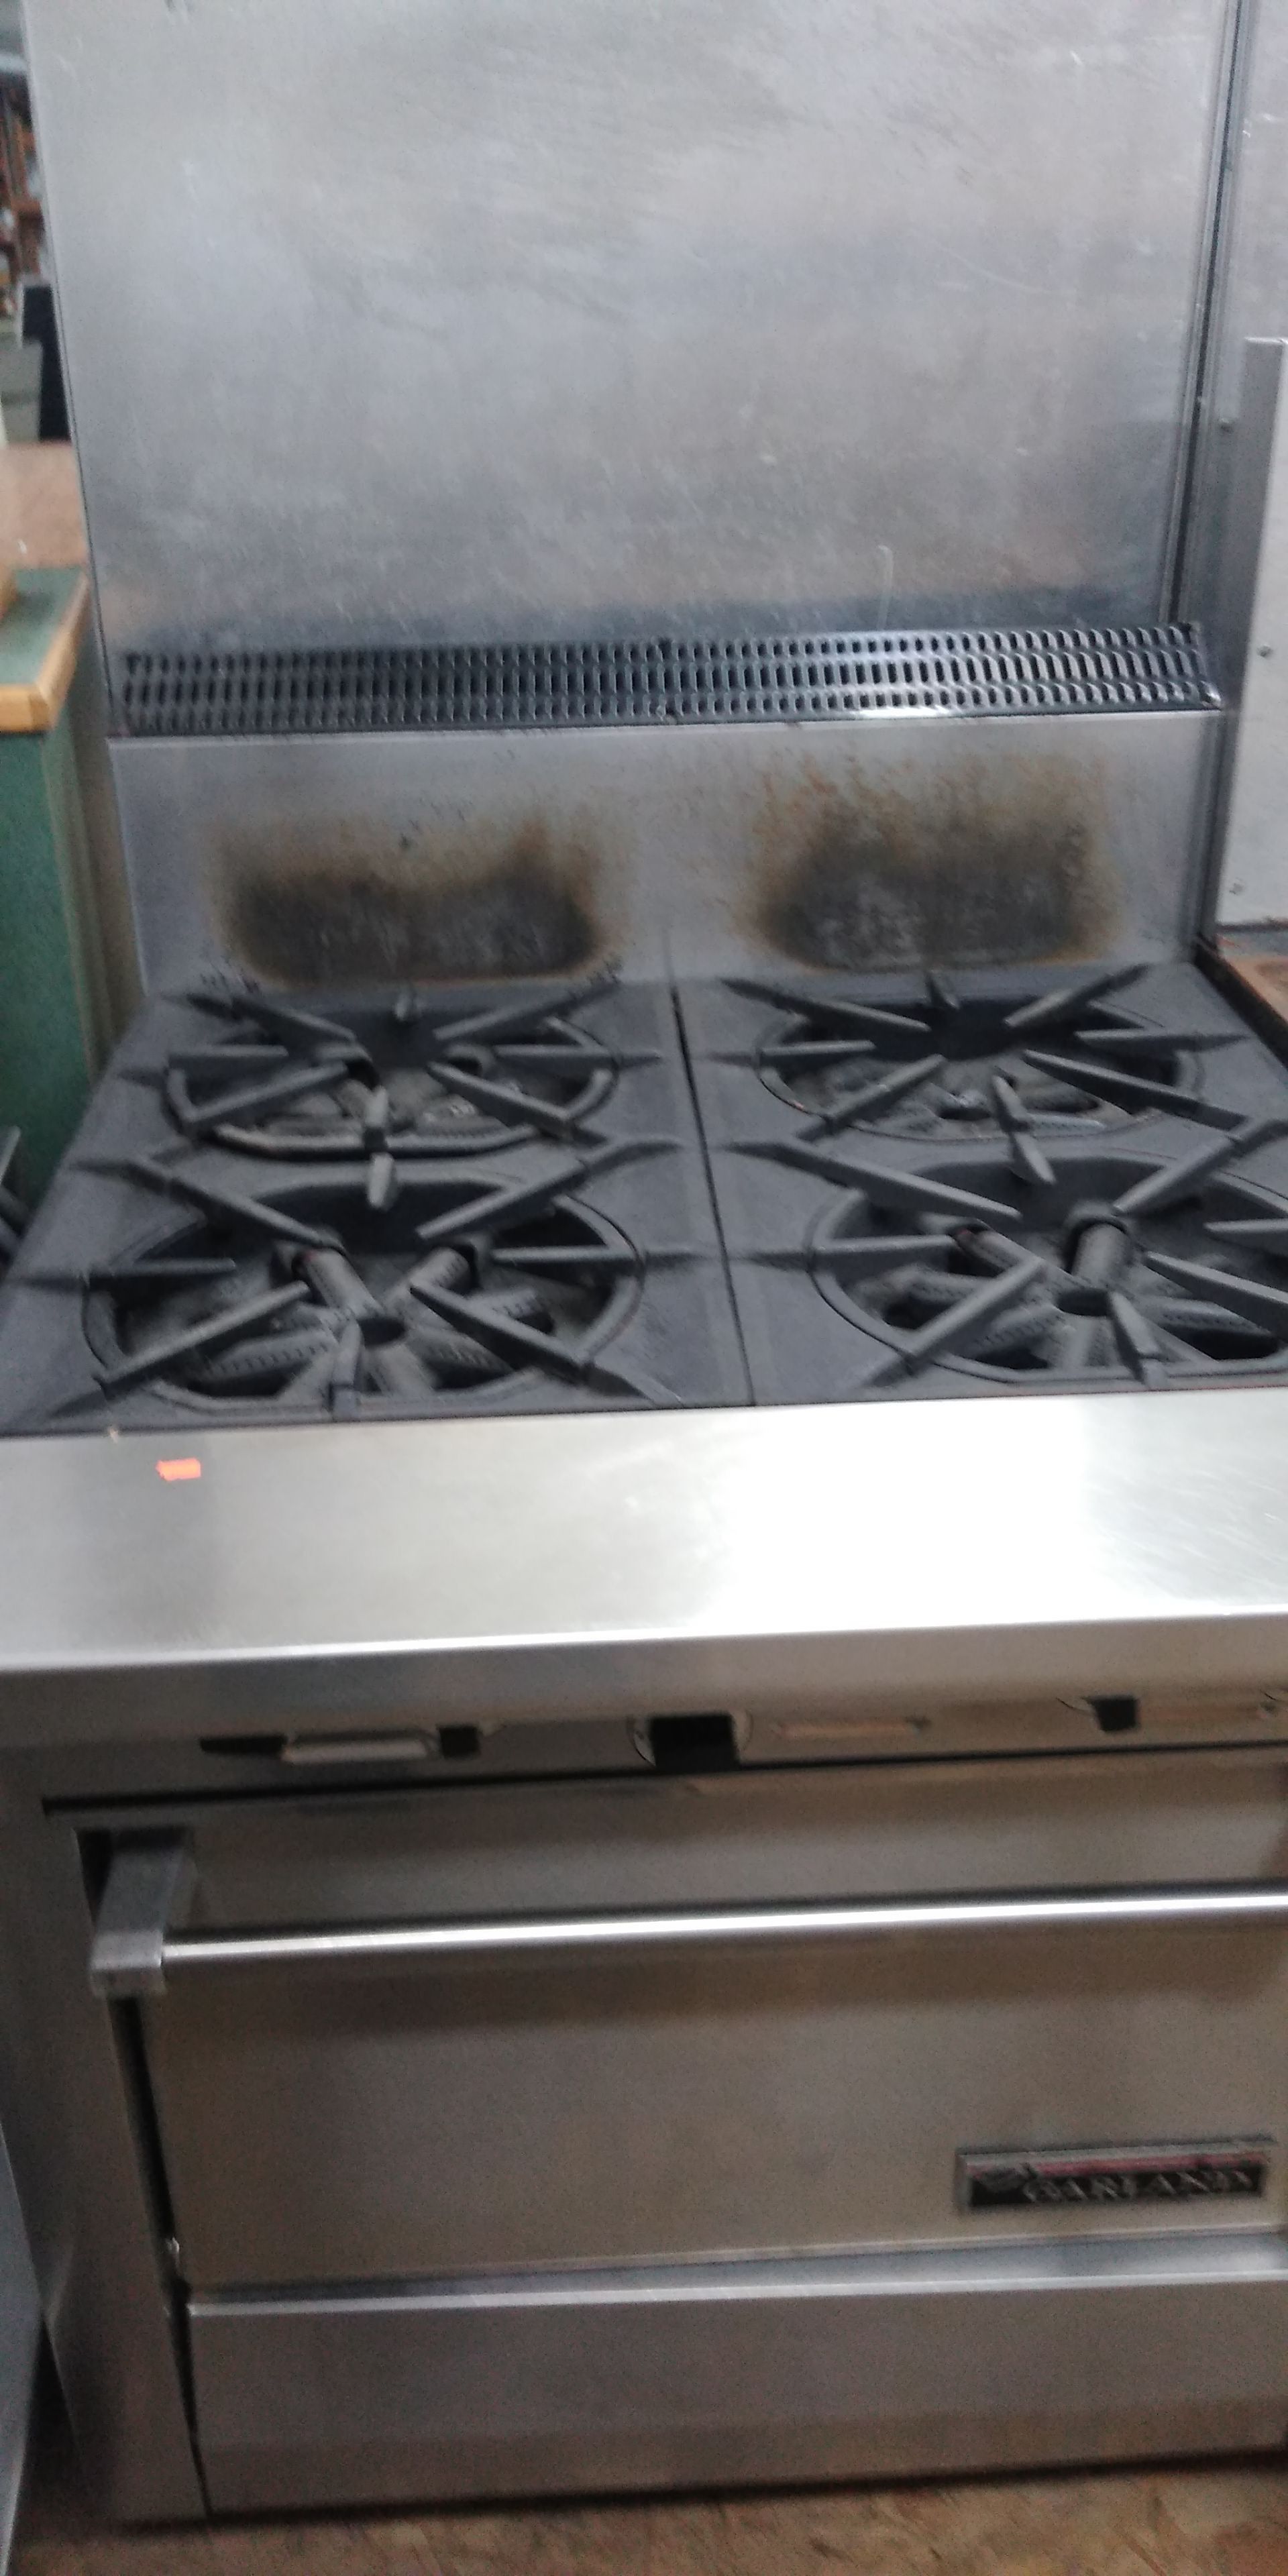 Restaurant Equipment and appliances sales located at 55 north main st Norwich ct starting price $99